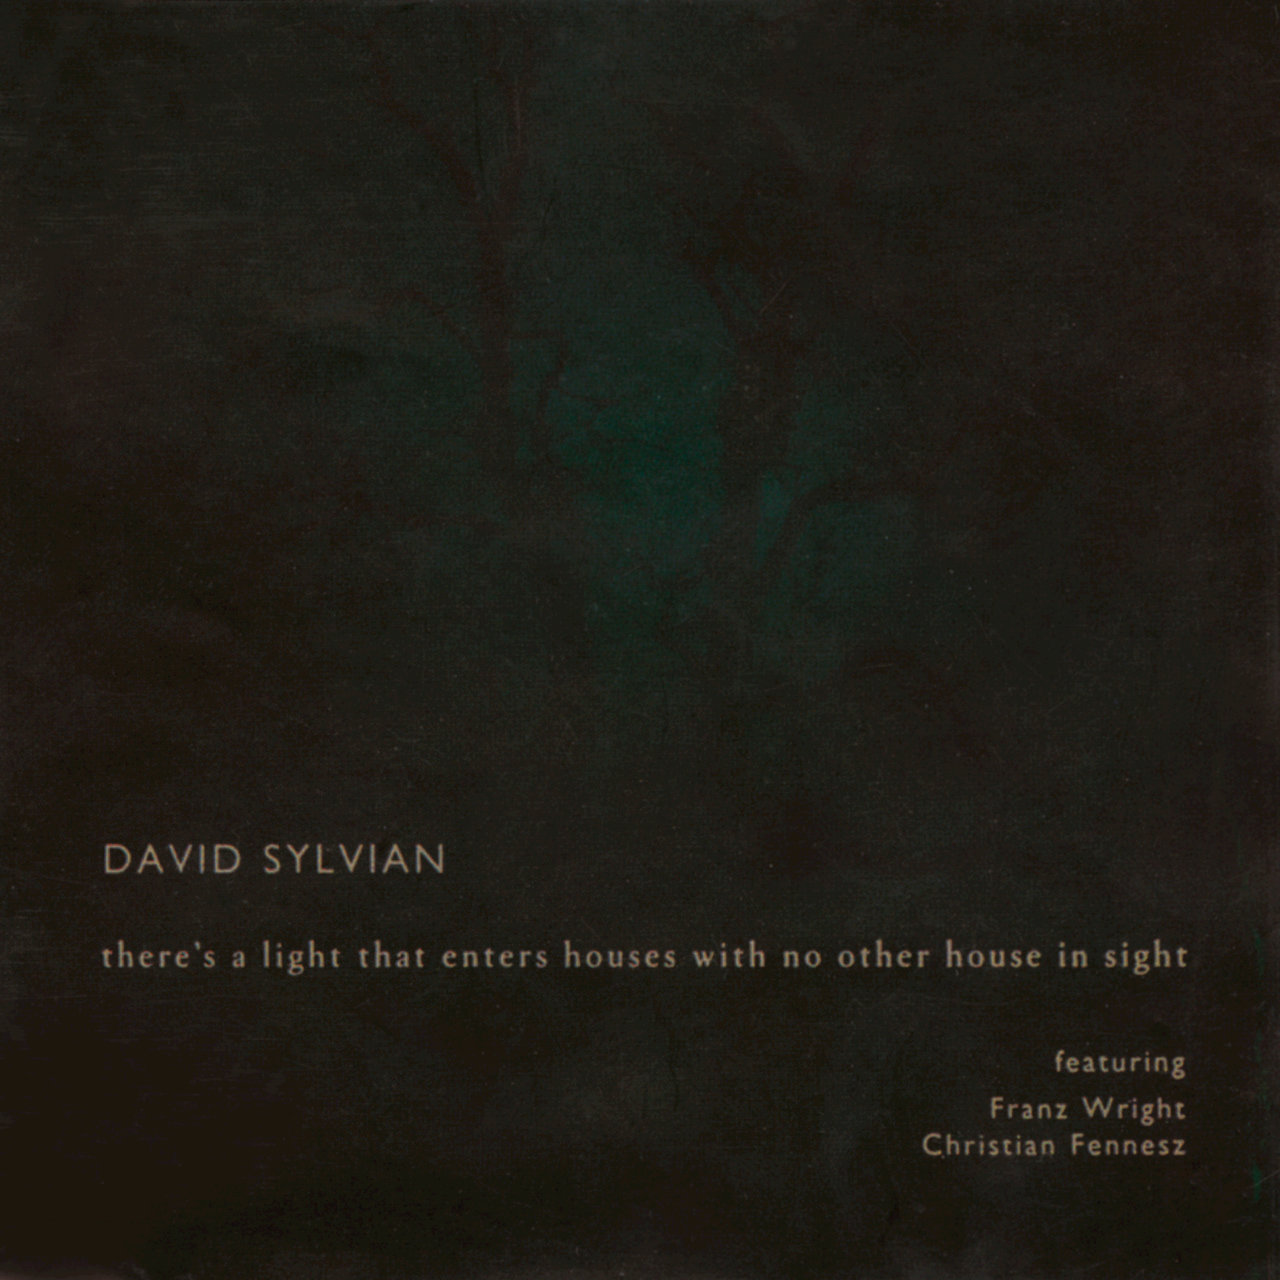 David Sylvian, Franz Wright, Christian Fennesz 'There's A Light That Enters Houses With No Other House In Sight